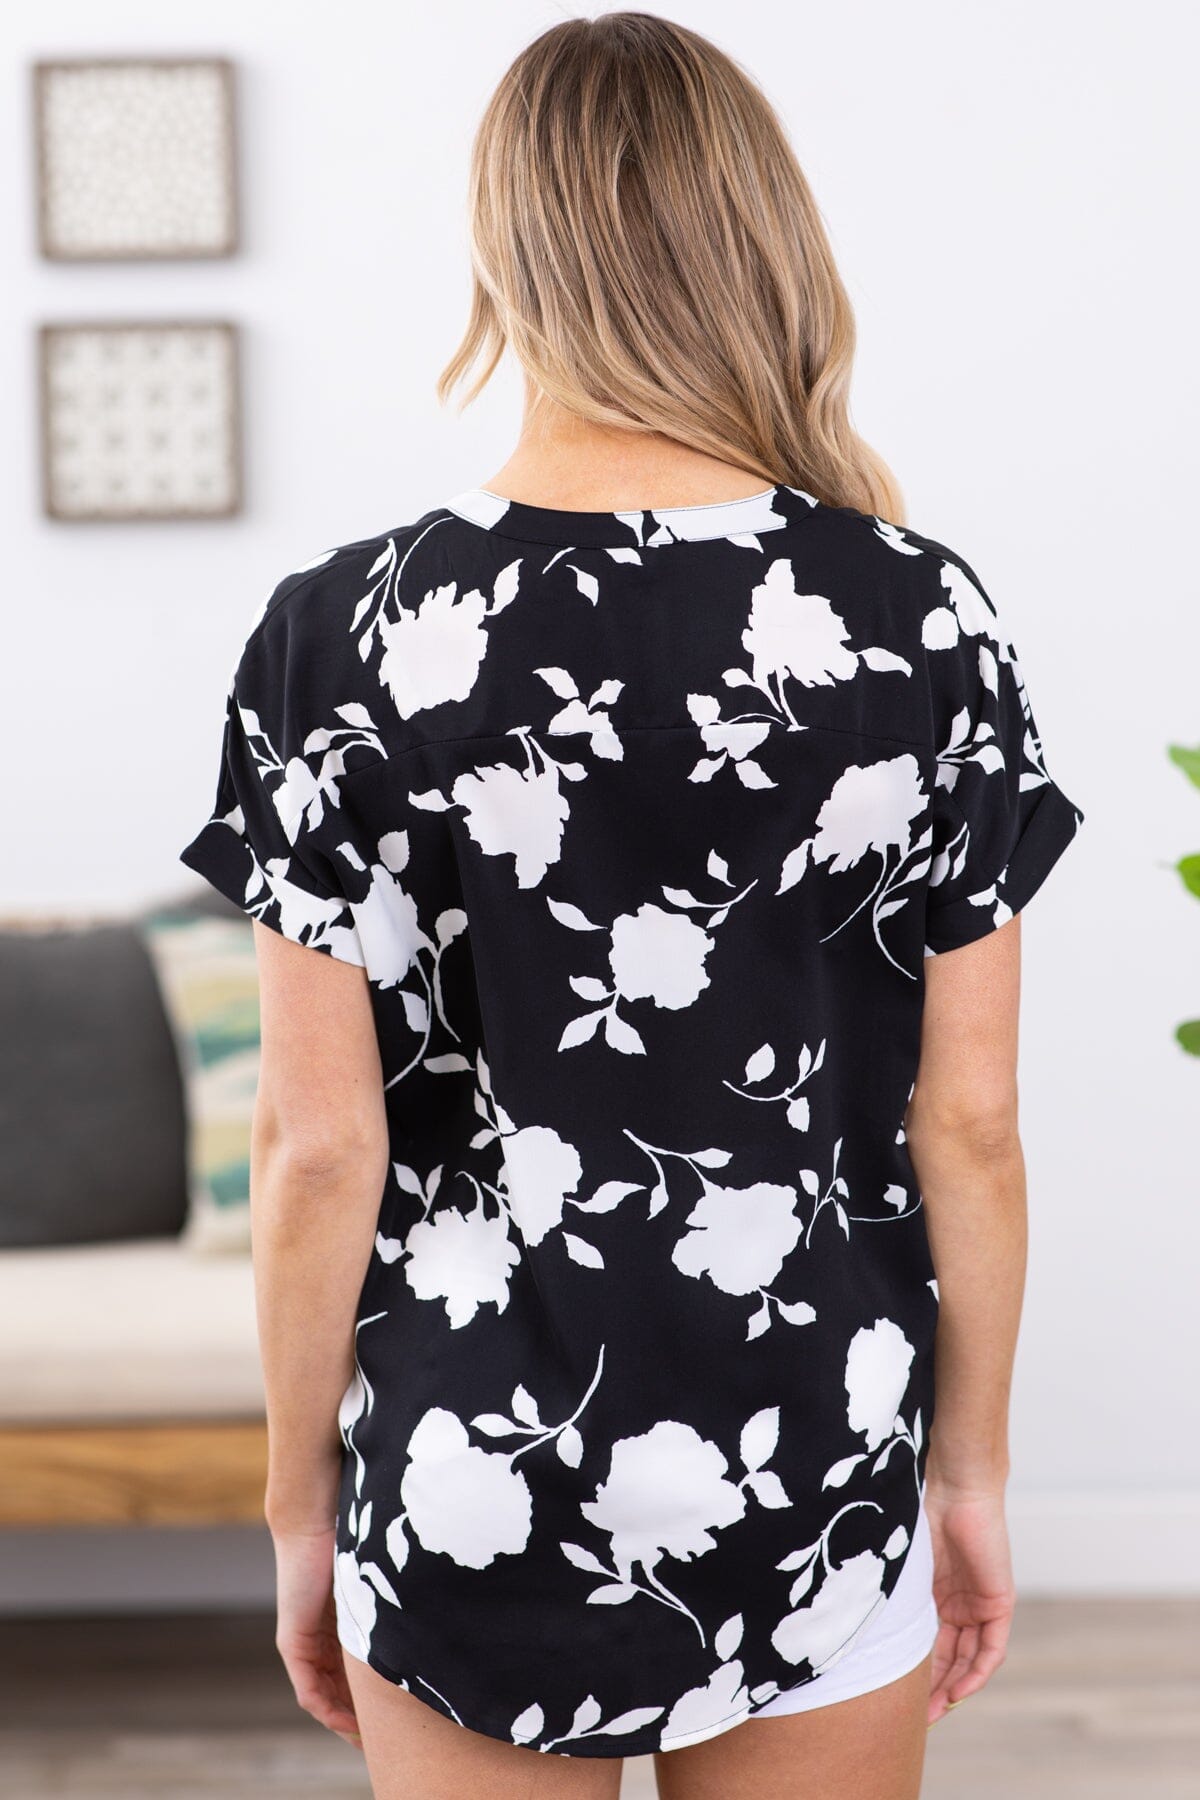 Black and White Floral Short Sleeve V-Neck Top - Filly Flair